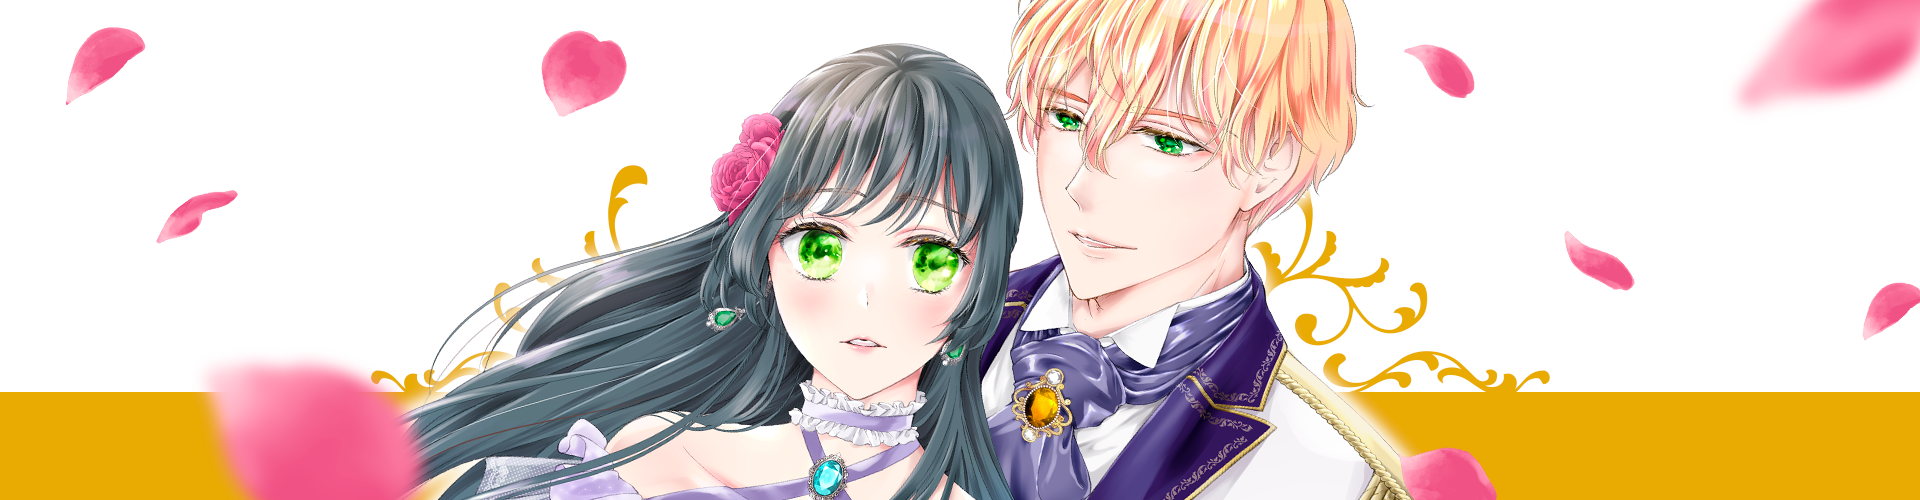 Comikey Launches Hakusensha Series, “Disguised as a Butler, the Former  Princess Evades the Prince's Love!”